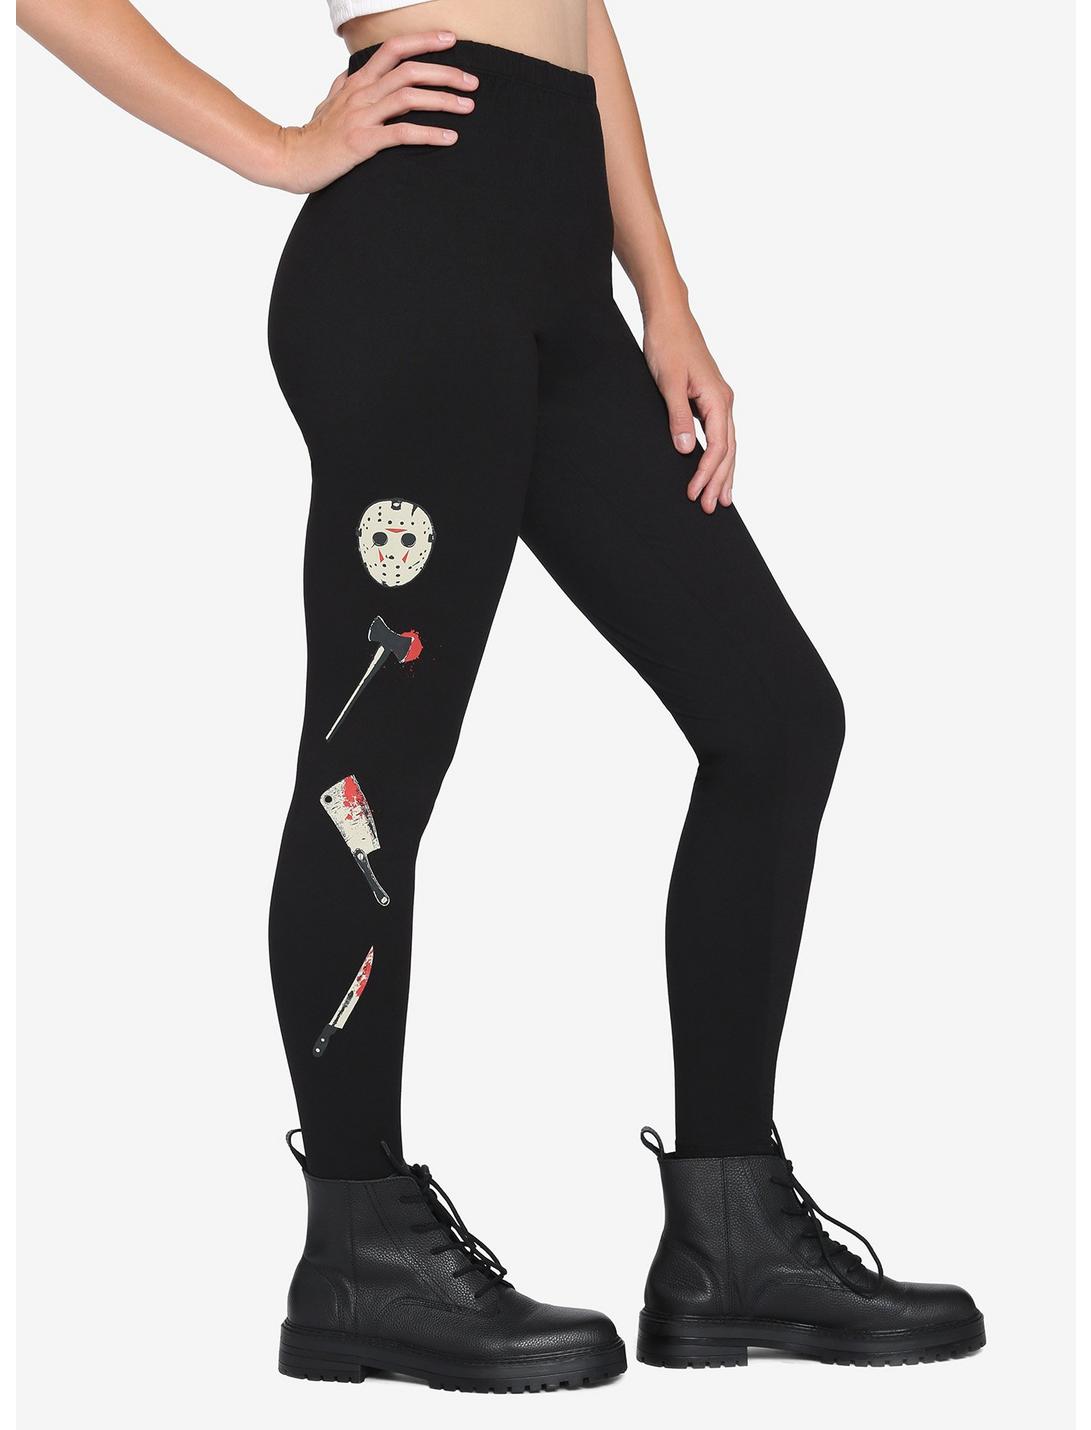 Friday The 13th Stacked Icons Leggings, MULTI, hi-res